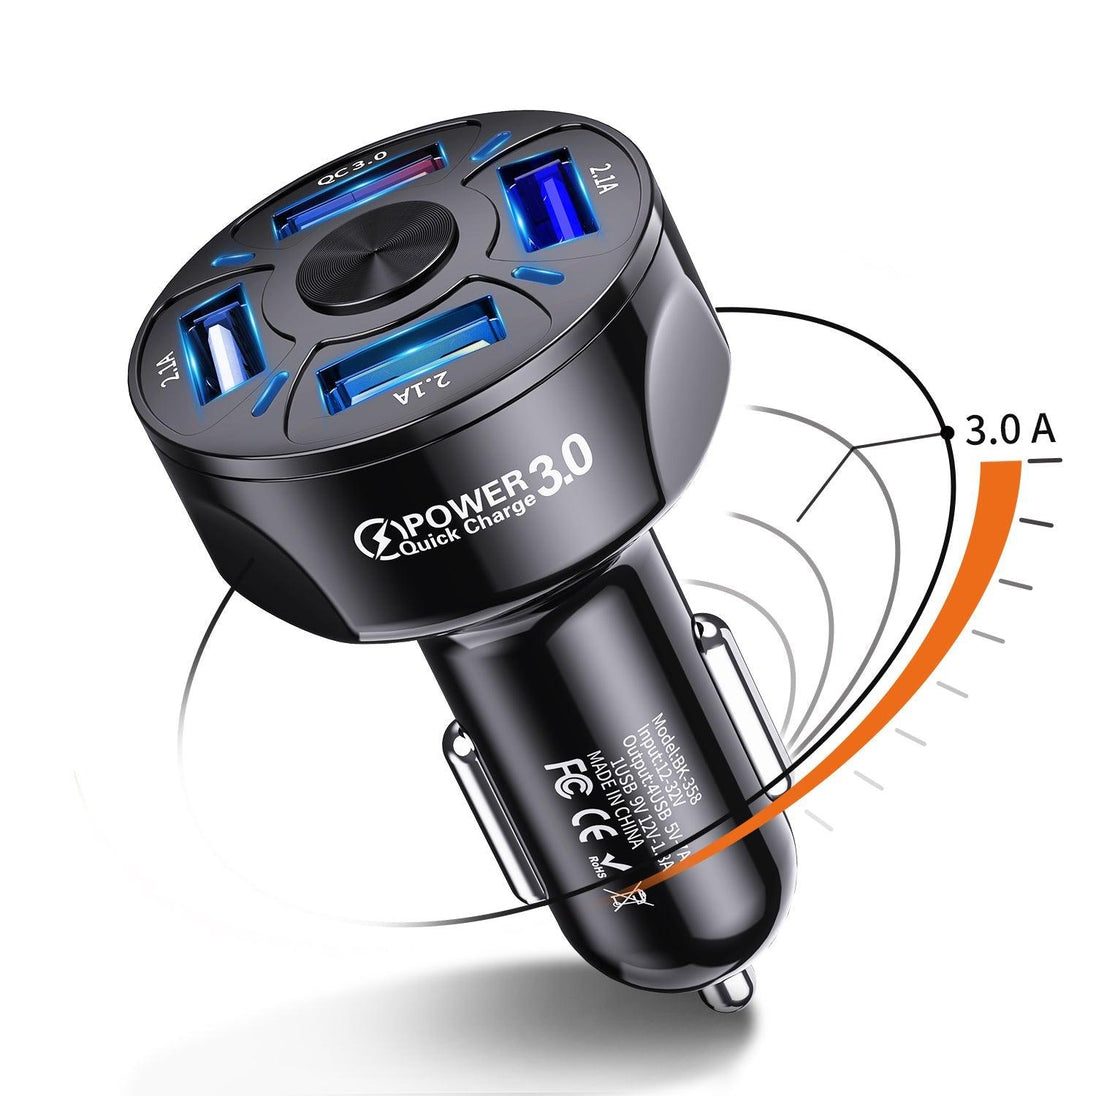 2 PACK PBG LED 4 Port Rapid Car Charger - Charges 4 Devices at once! - PremiumBrandGoods